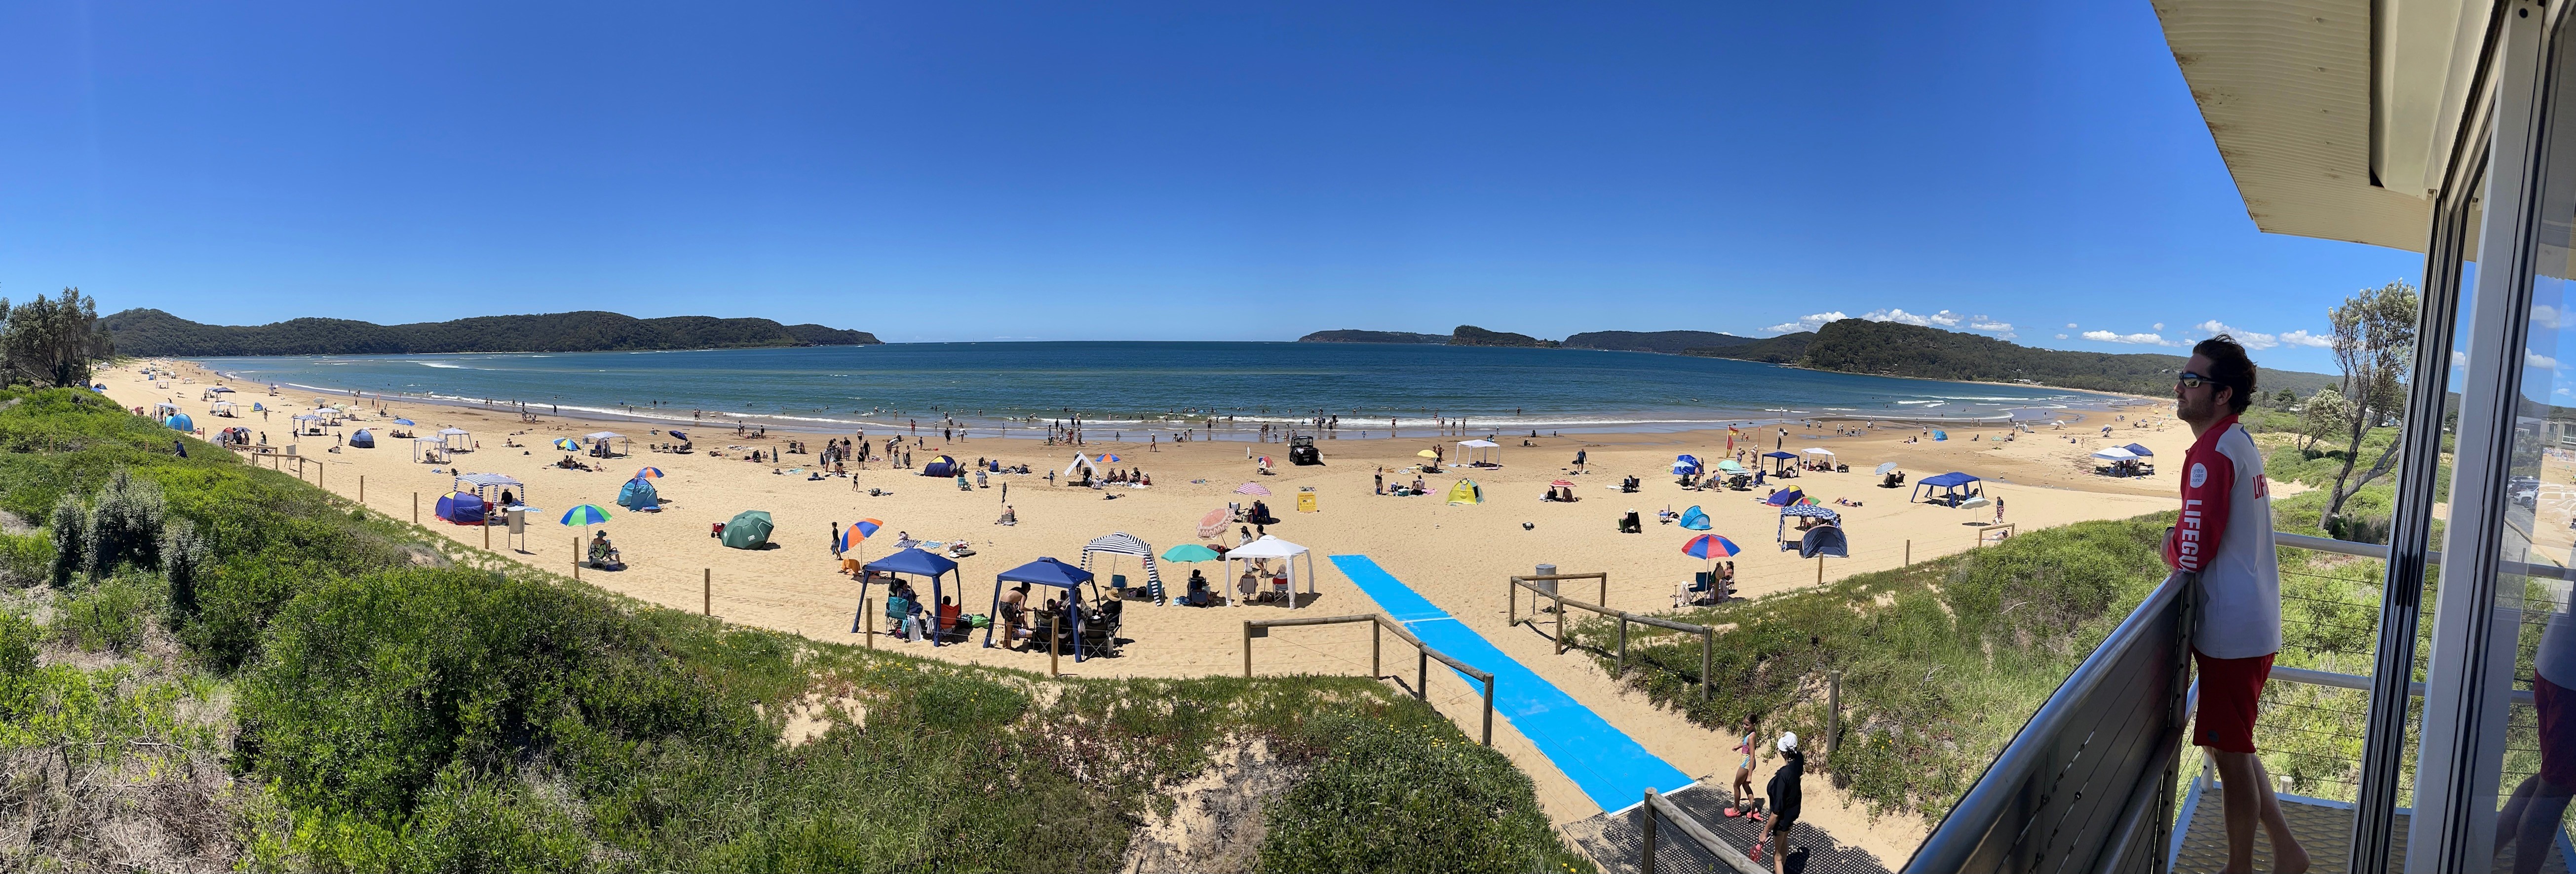 view of Ocean Beach Umina from the lifeguard tower